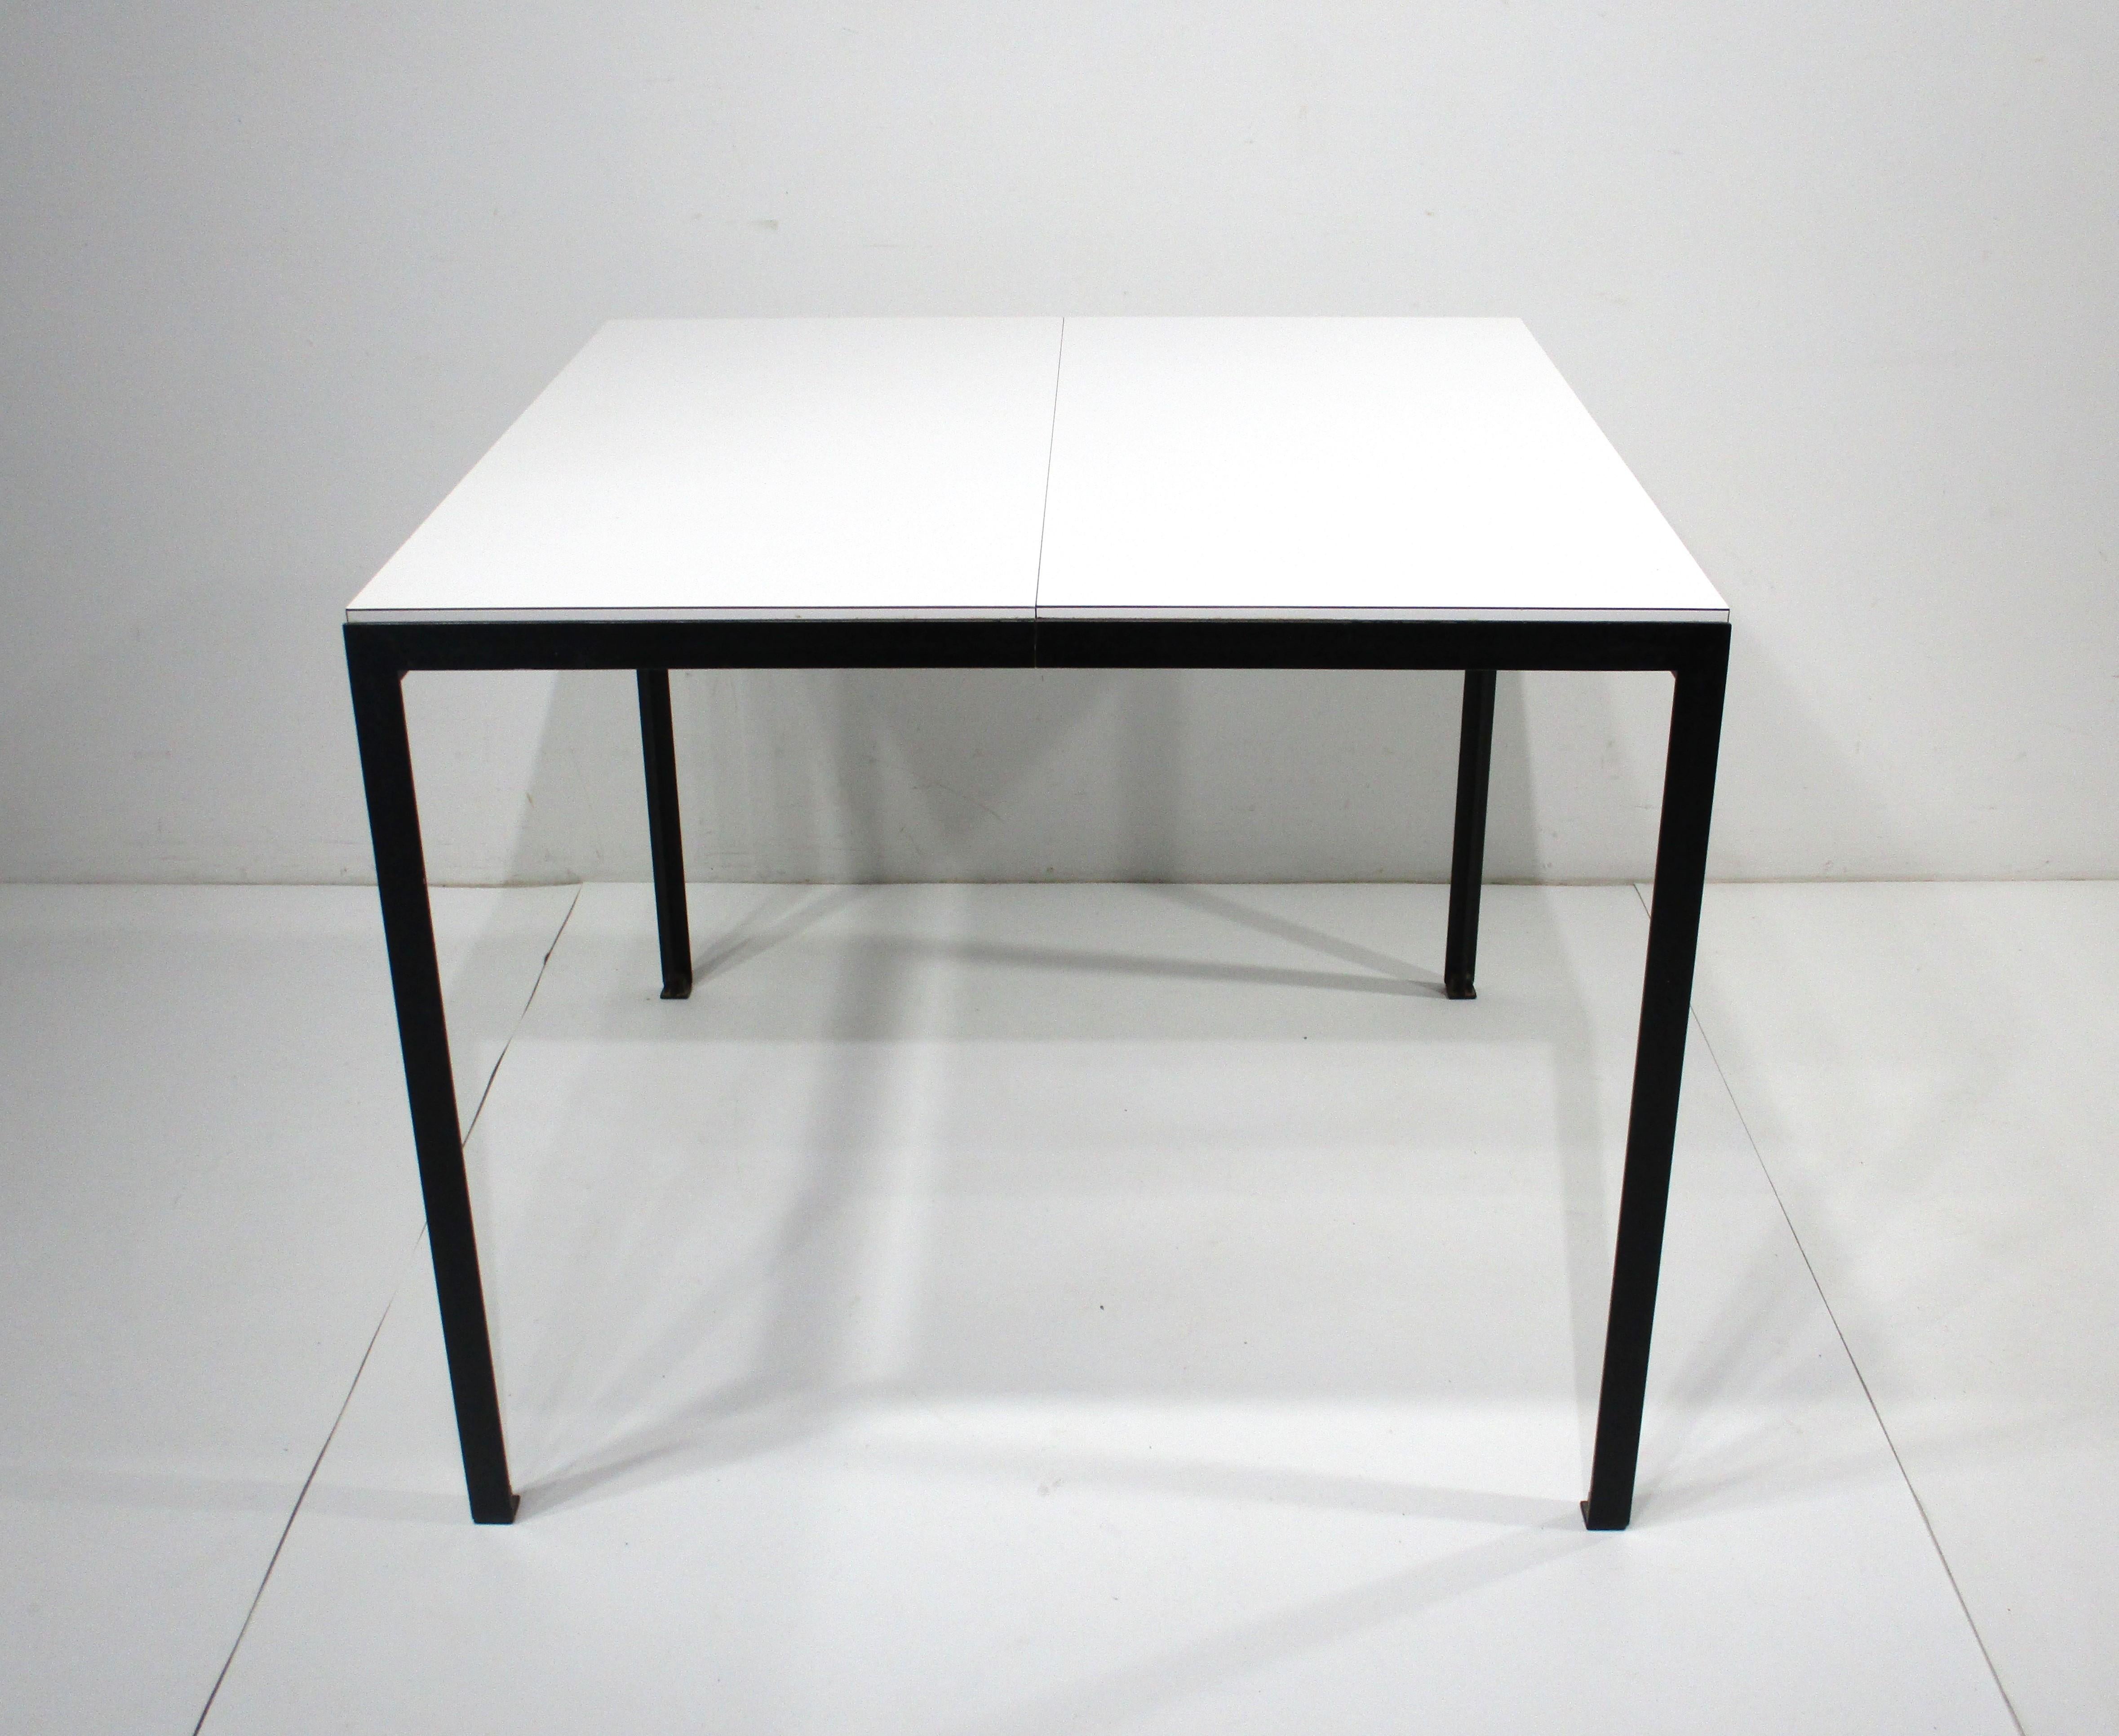 A well crafted smaller extension dining table with white Laminate top and satin black angled steel base with foot pads . This brilliant design has a folding pop up table leave that is connected to the underside of the table , just spread the table